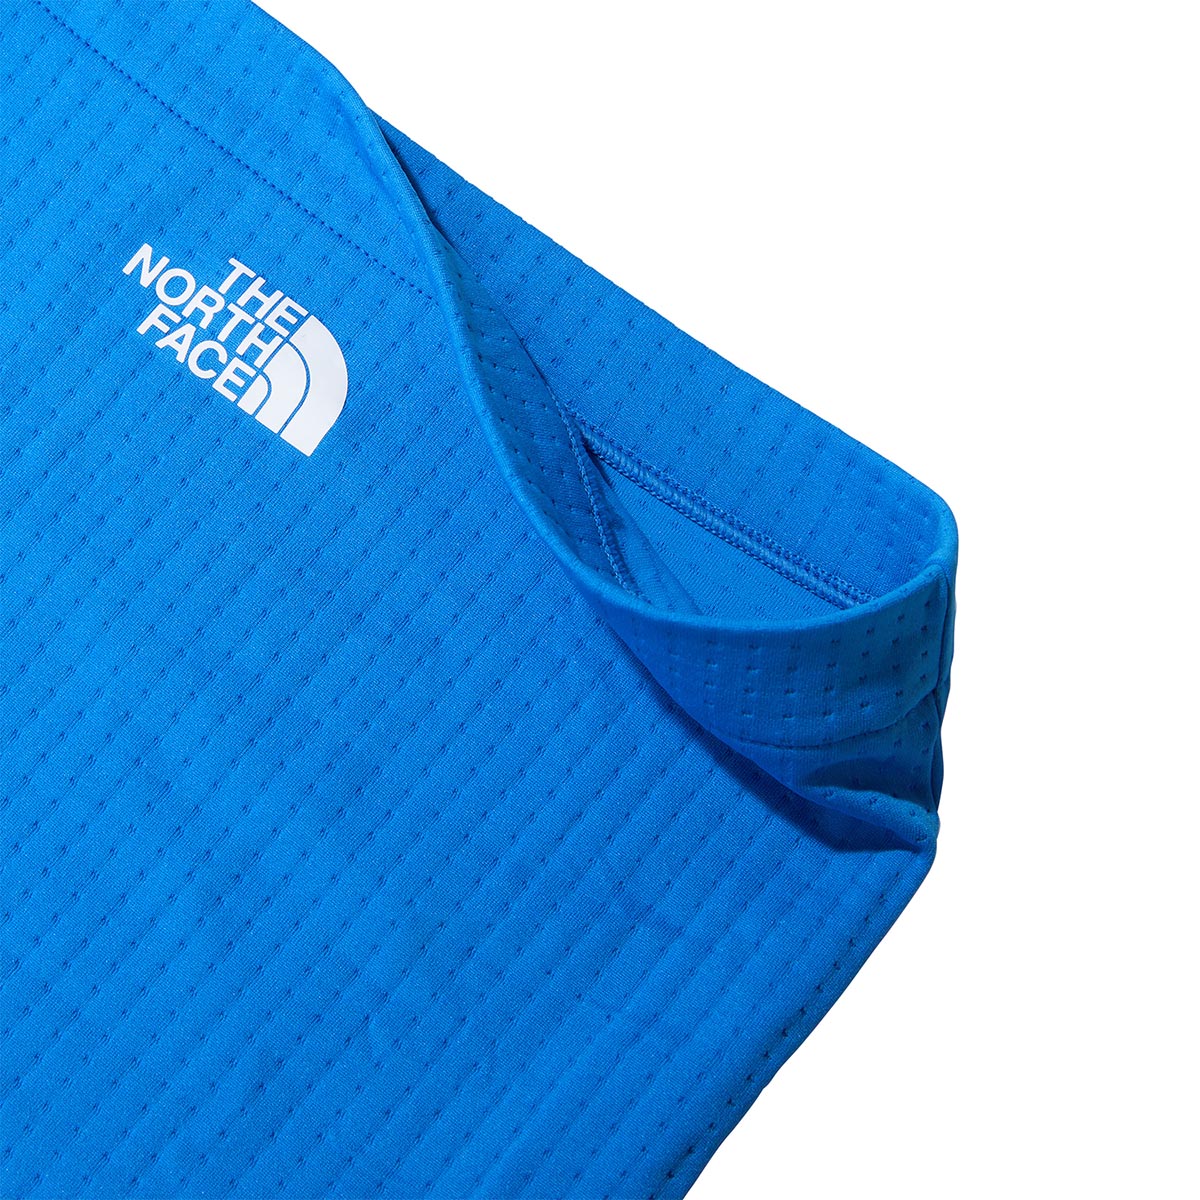 THE NORTH FACE - FASTECH NECK WARMER